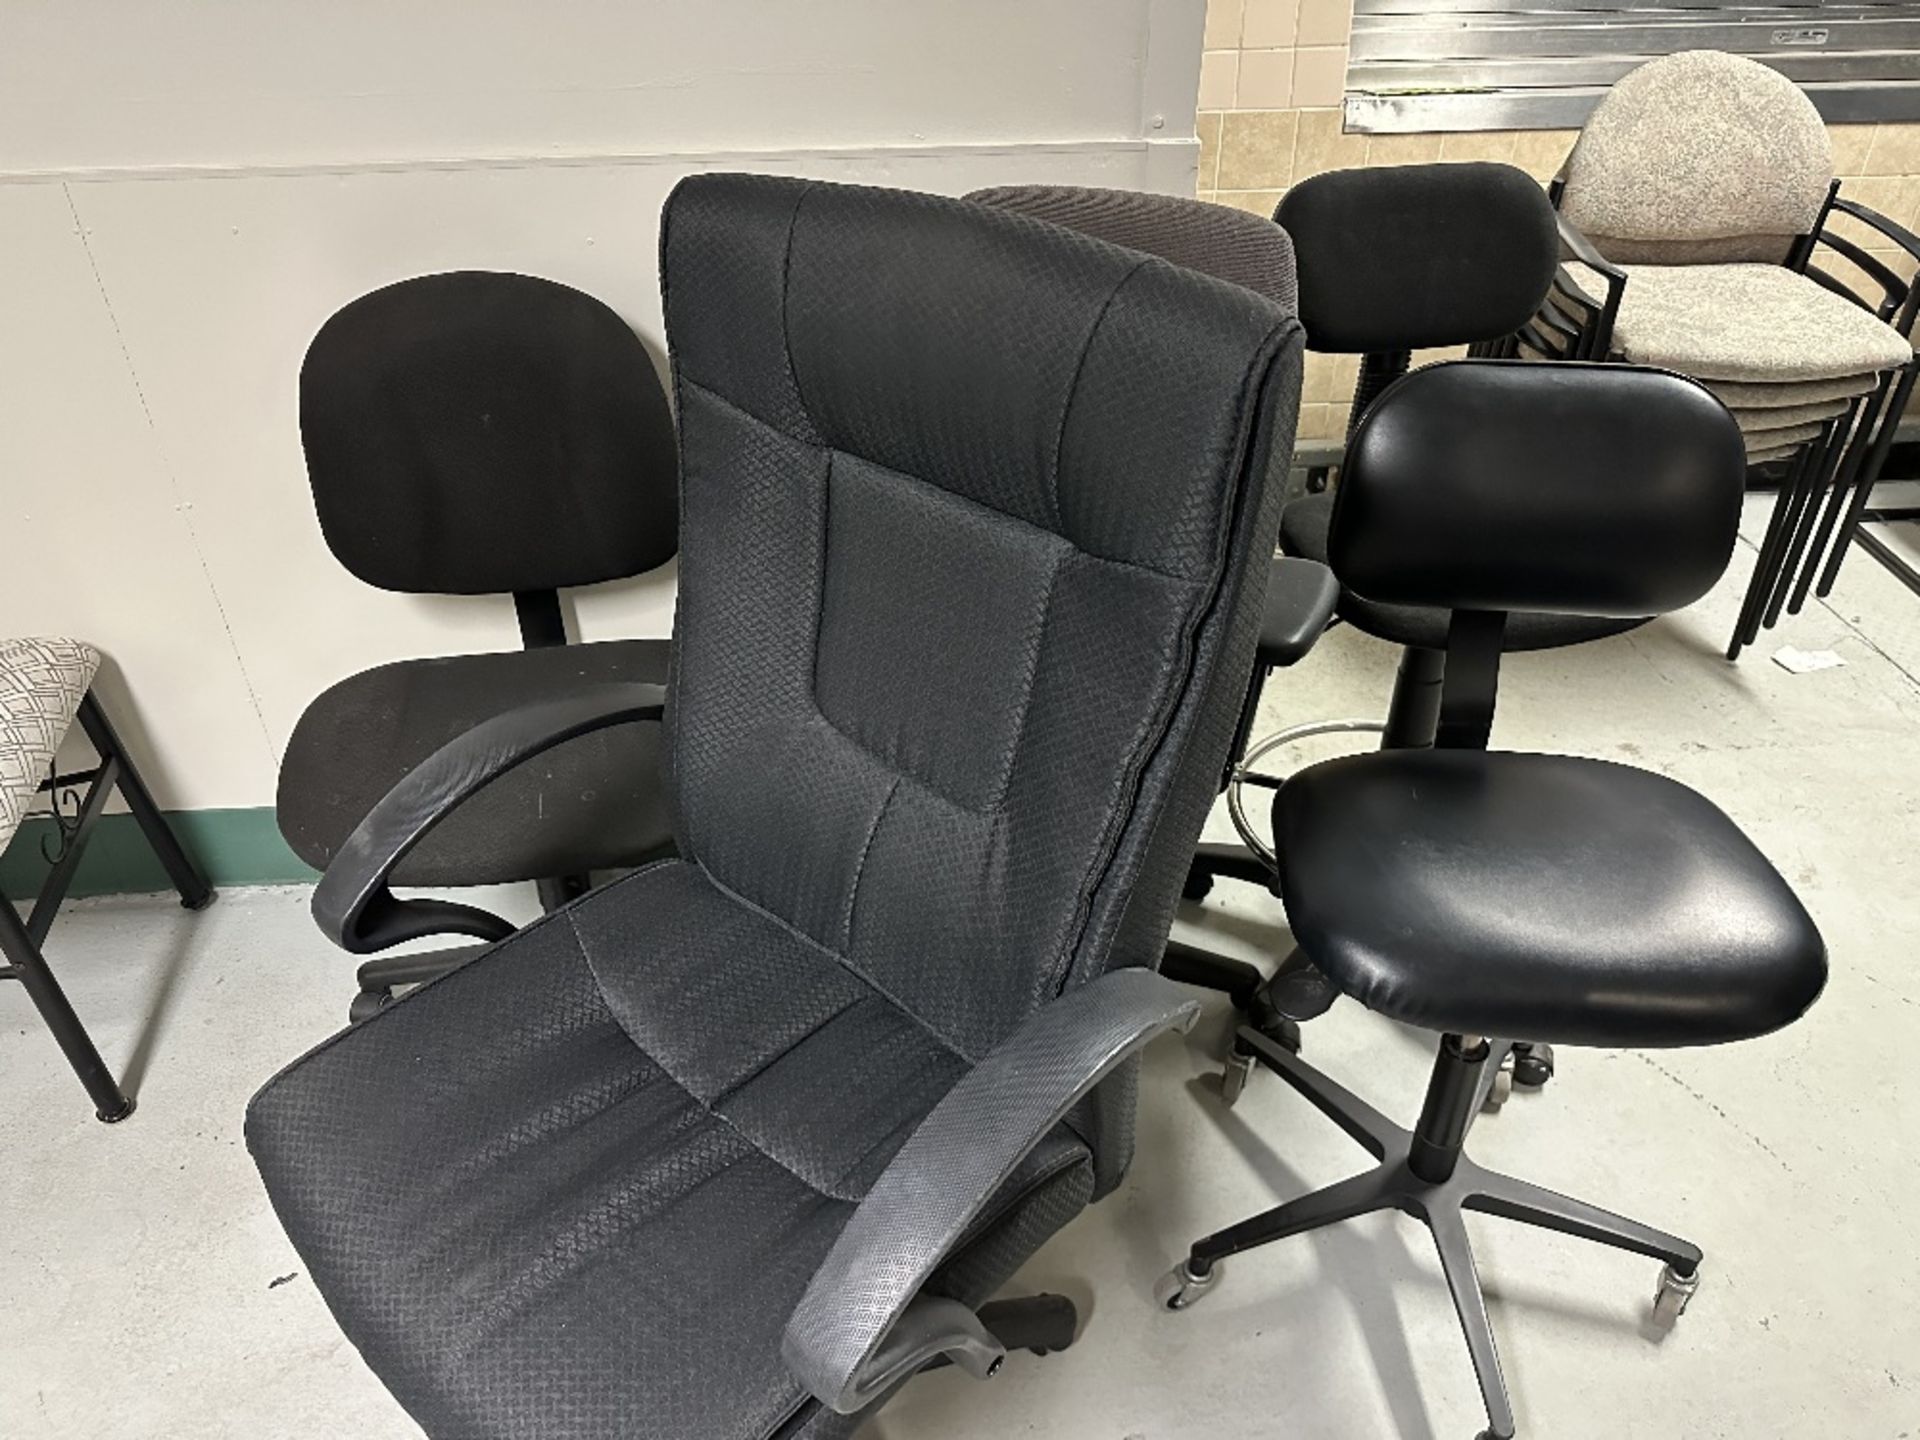 5 Pcs Office Chairs Assorted (LOCATED IN MIDDLETOWN, N.Y.)-FOR PACKAGING & SHIPPING QUOTE, PLEASE